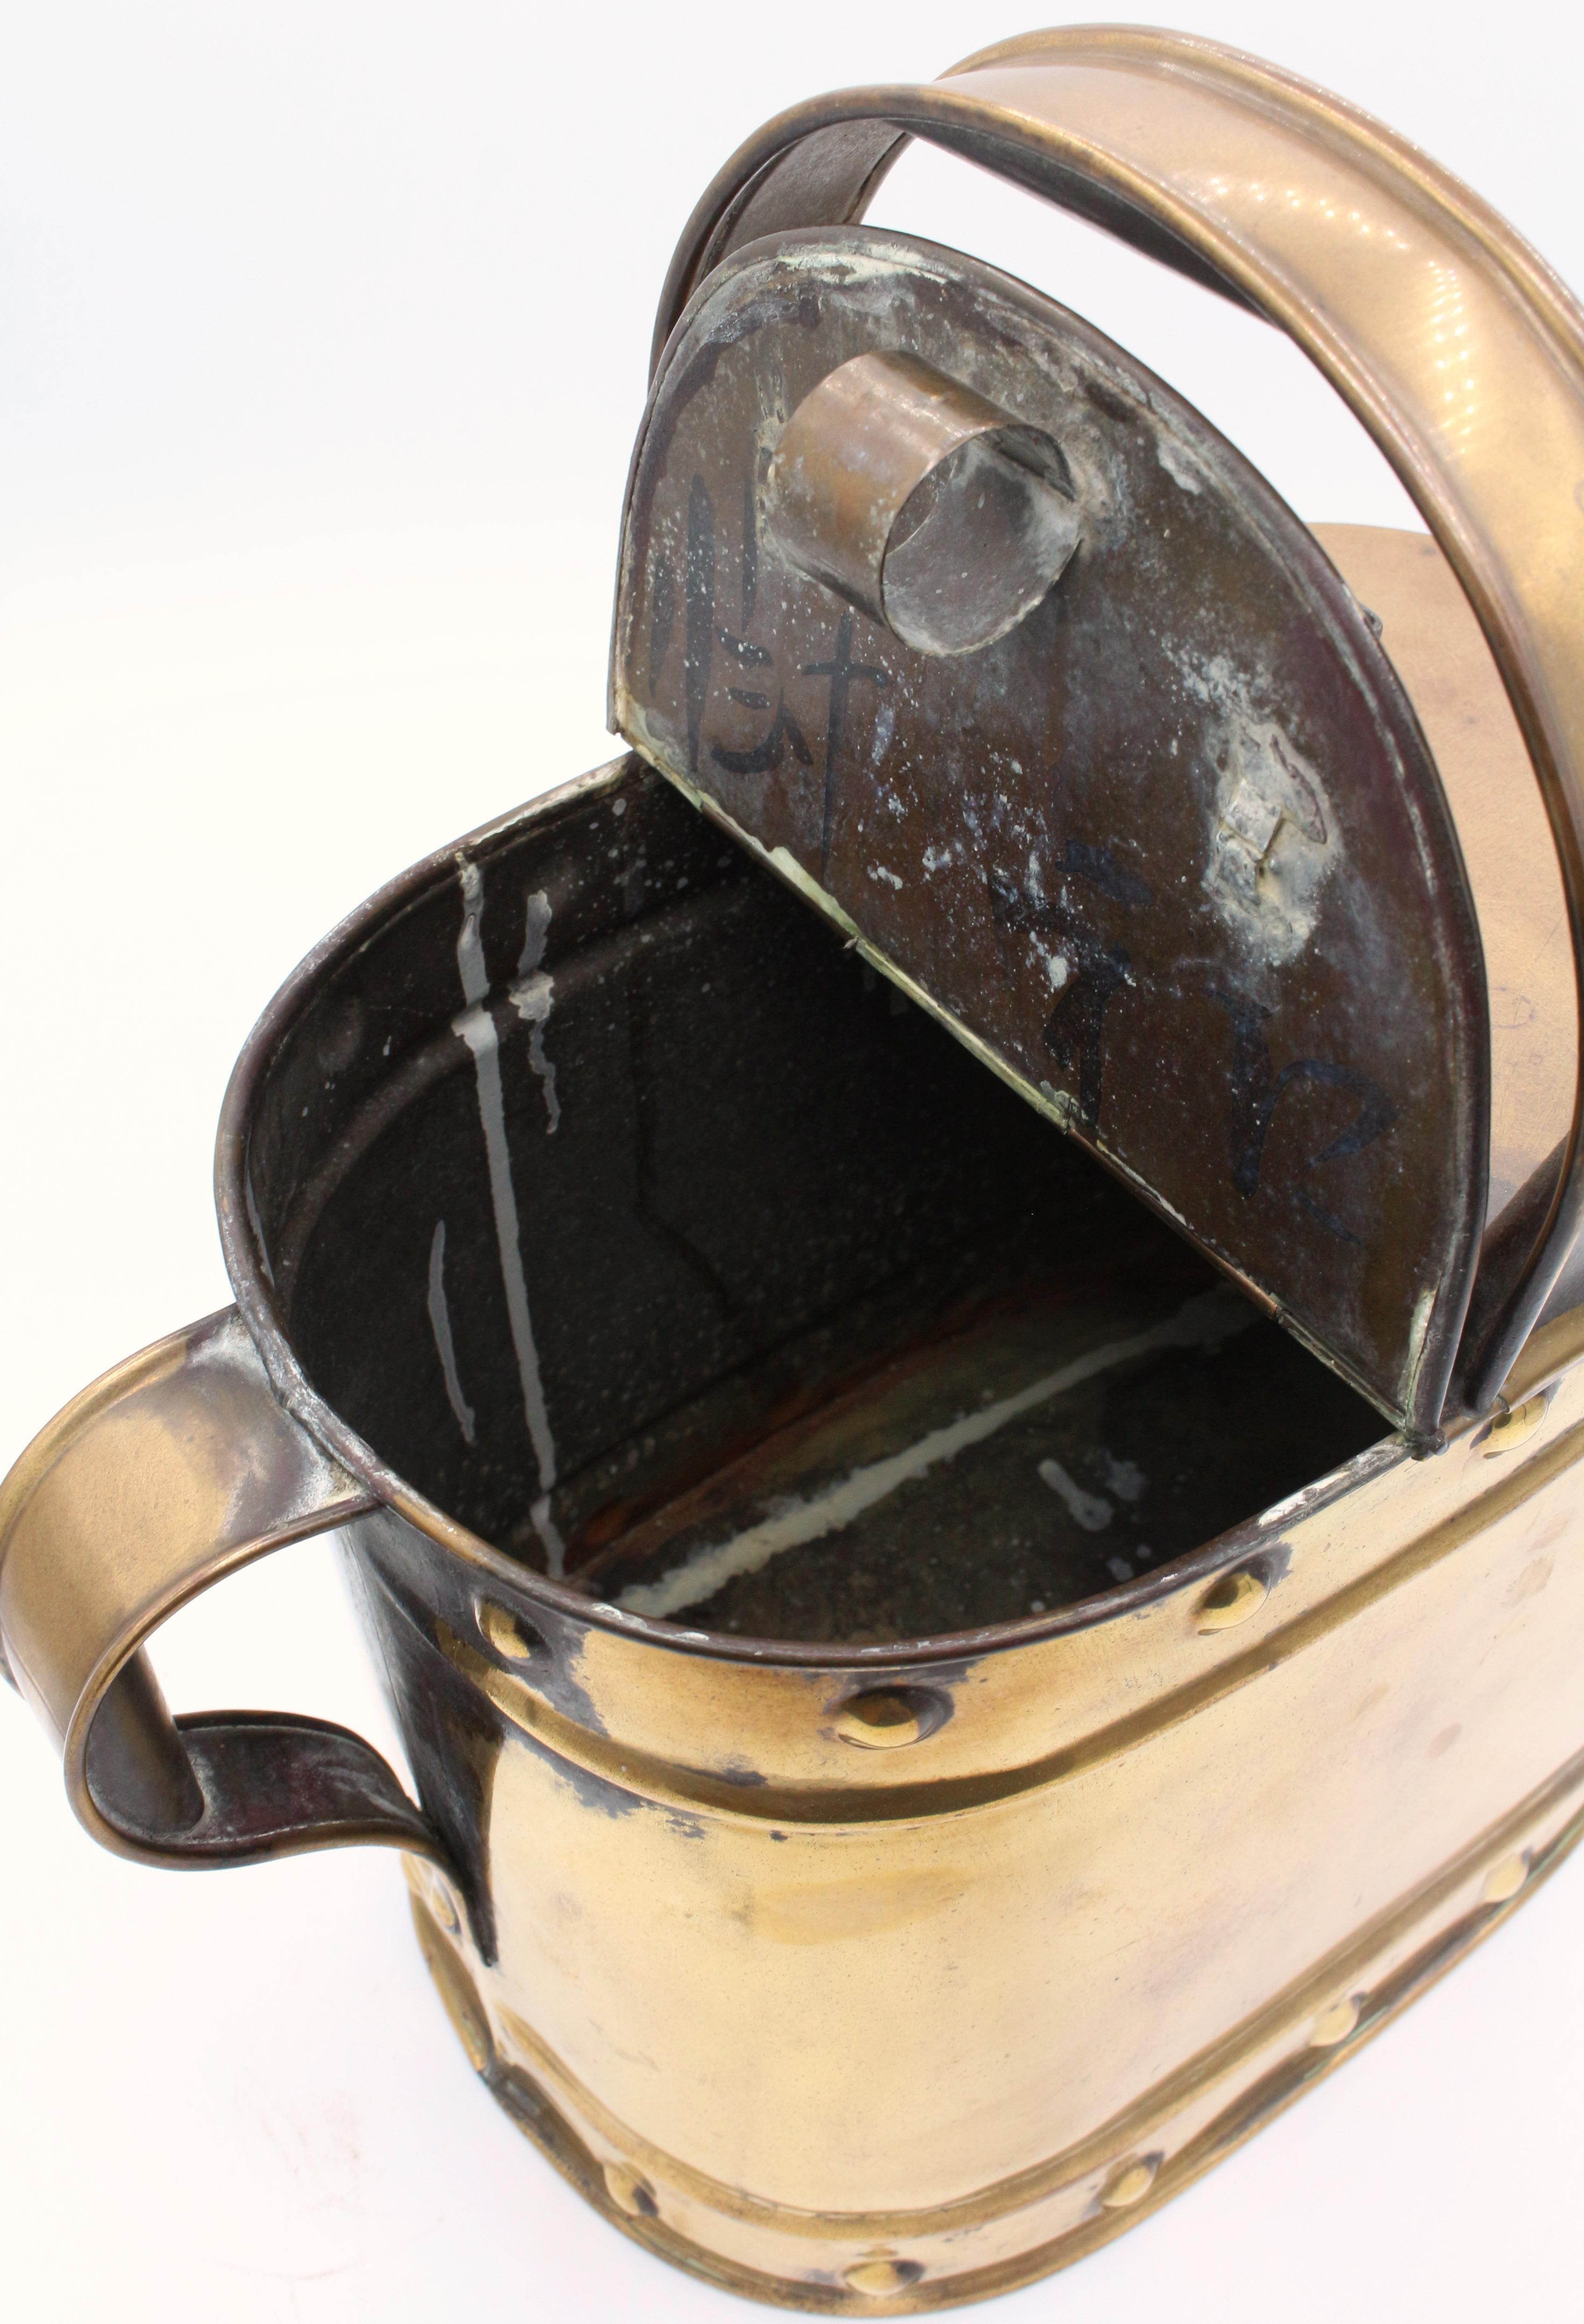 Circa 1880 Chinese Export Brass Watering Can 1